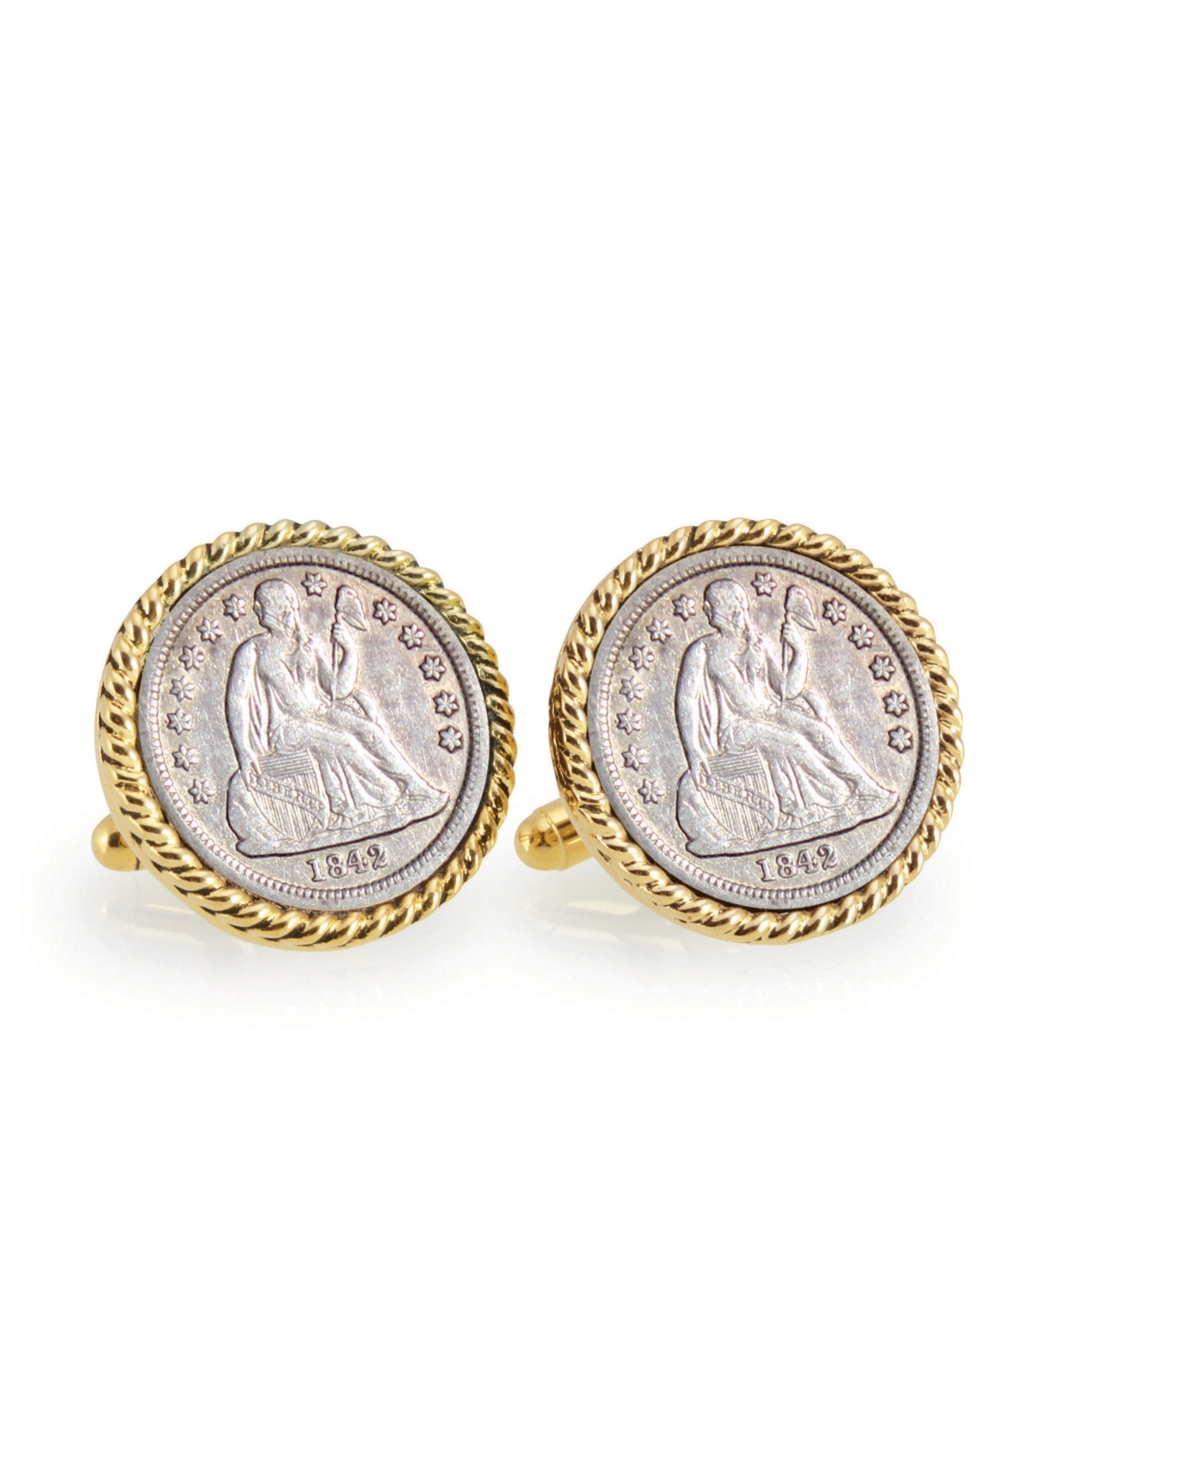 Seated Liberty Silver Dime Rope Bezel Coin Cuff Links - Gold